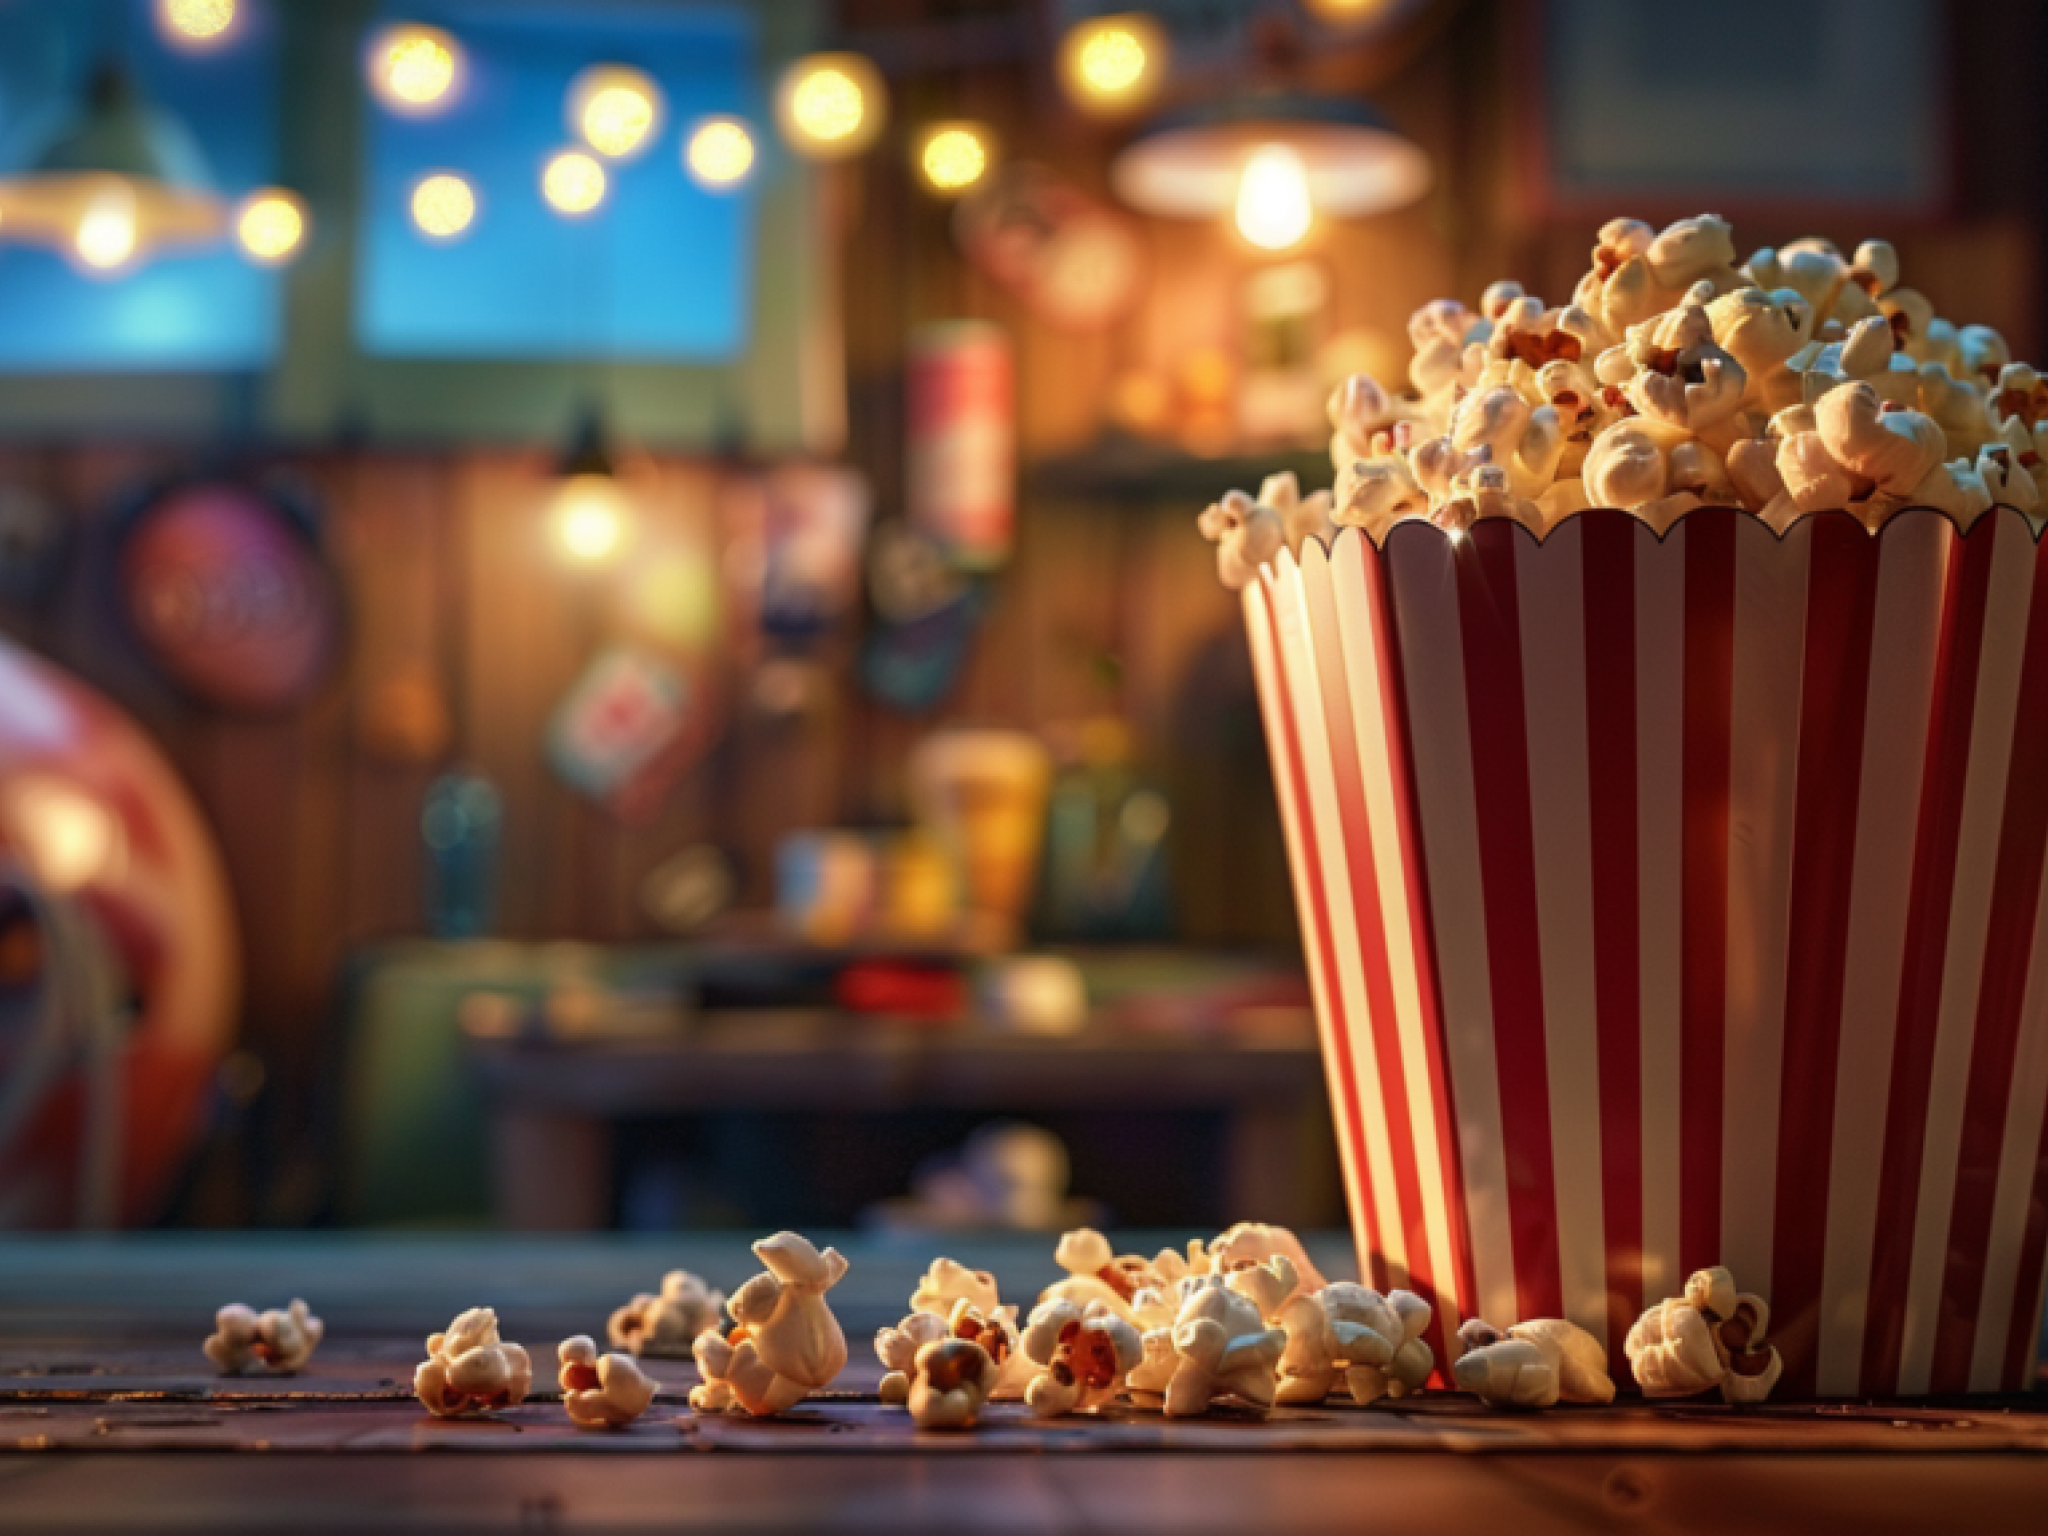  grab-your-popcorn-netflix-launches-now-popping-for-the-ultimate-binge-session 